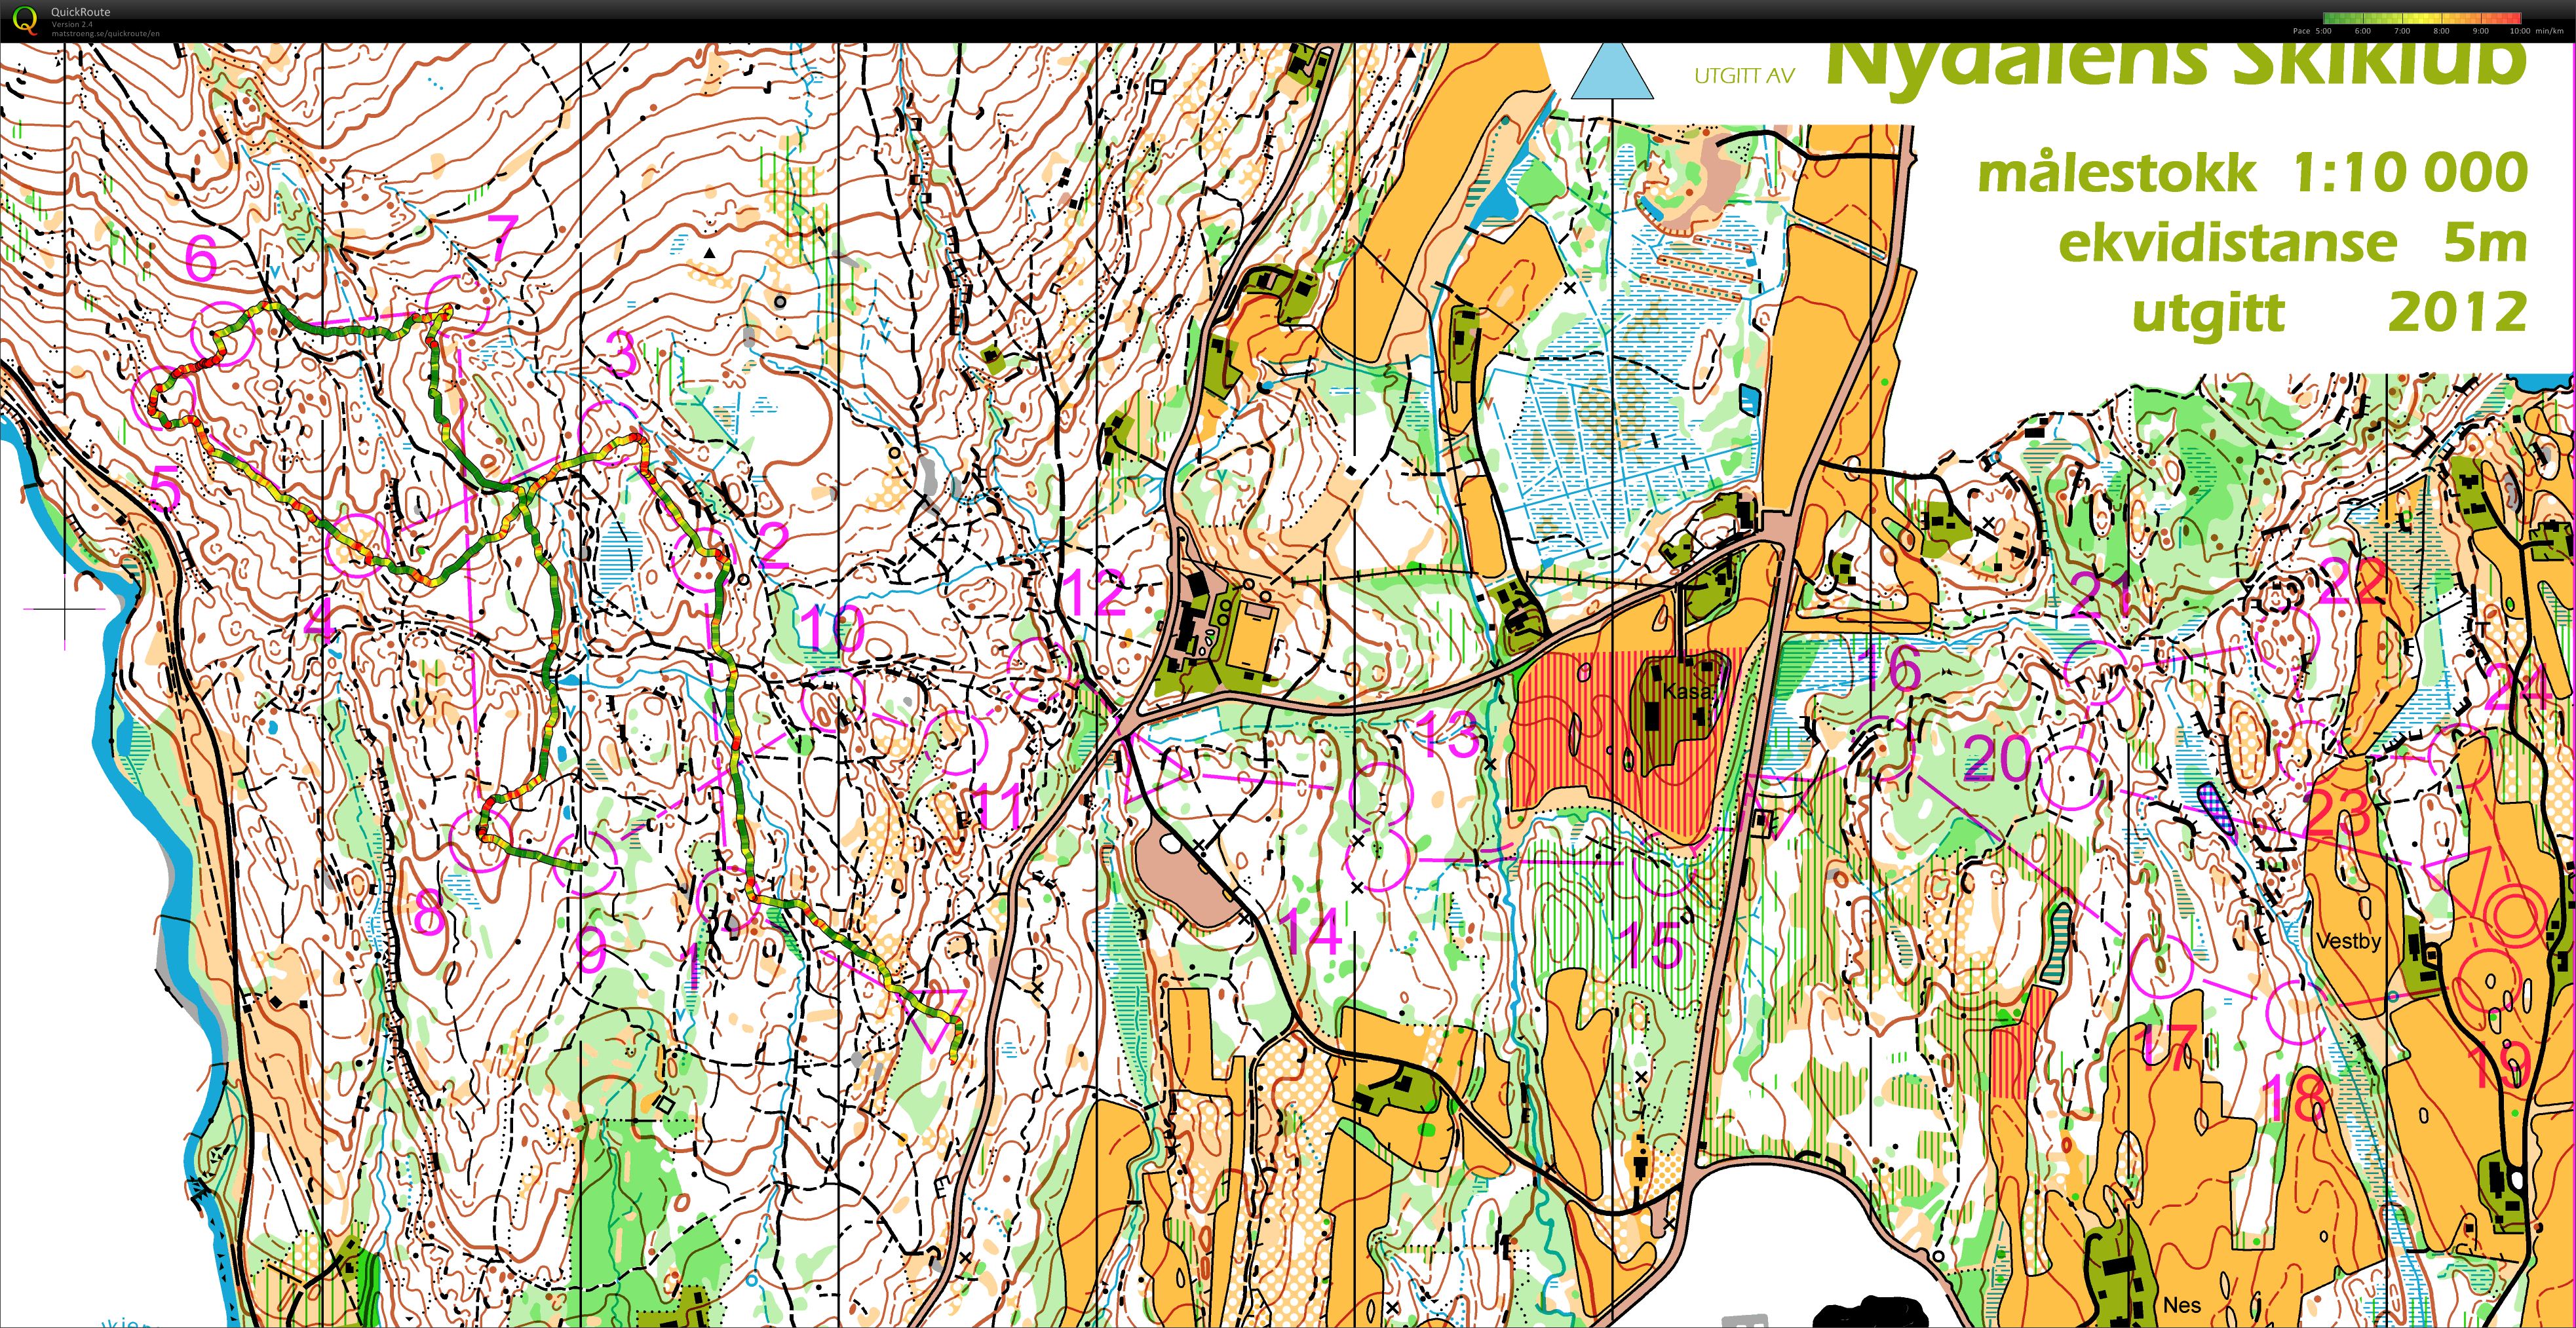 Norwegian Champs Middle M21 Final (first 9 controls) (15/09/2012)